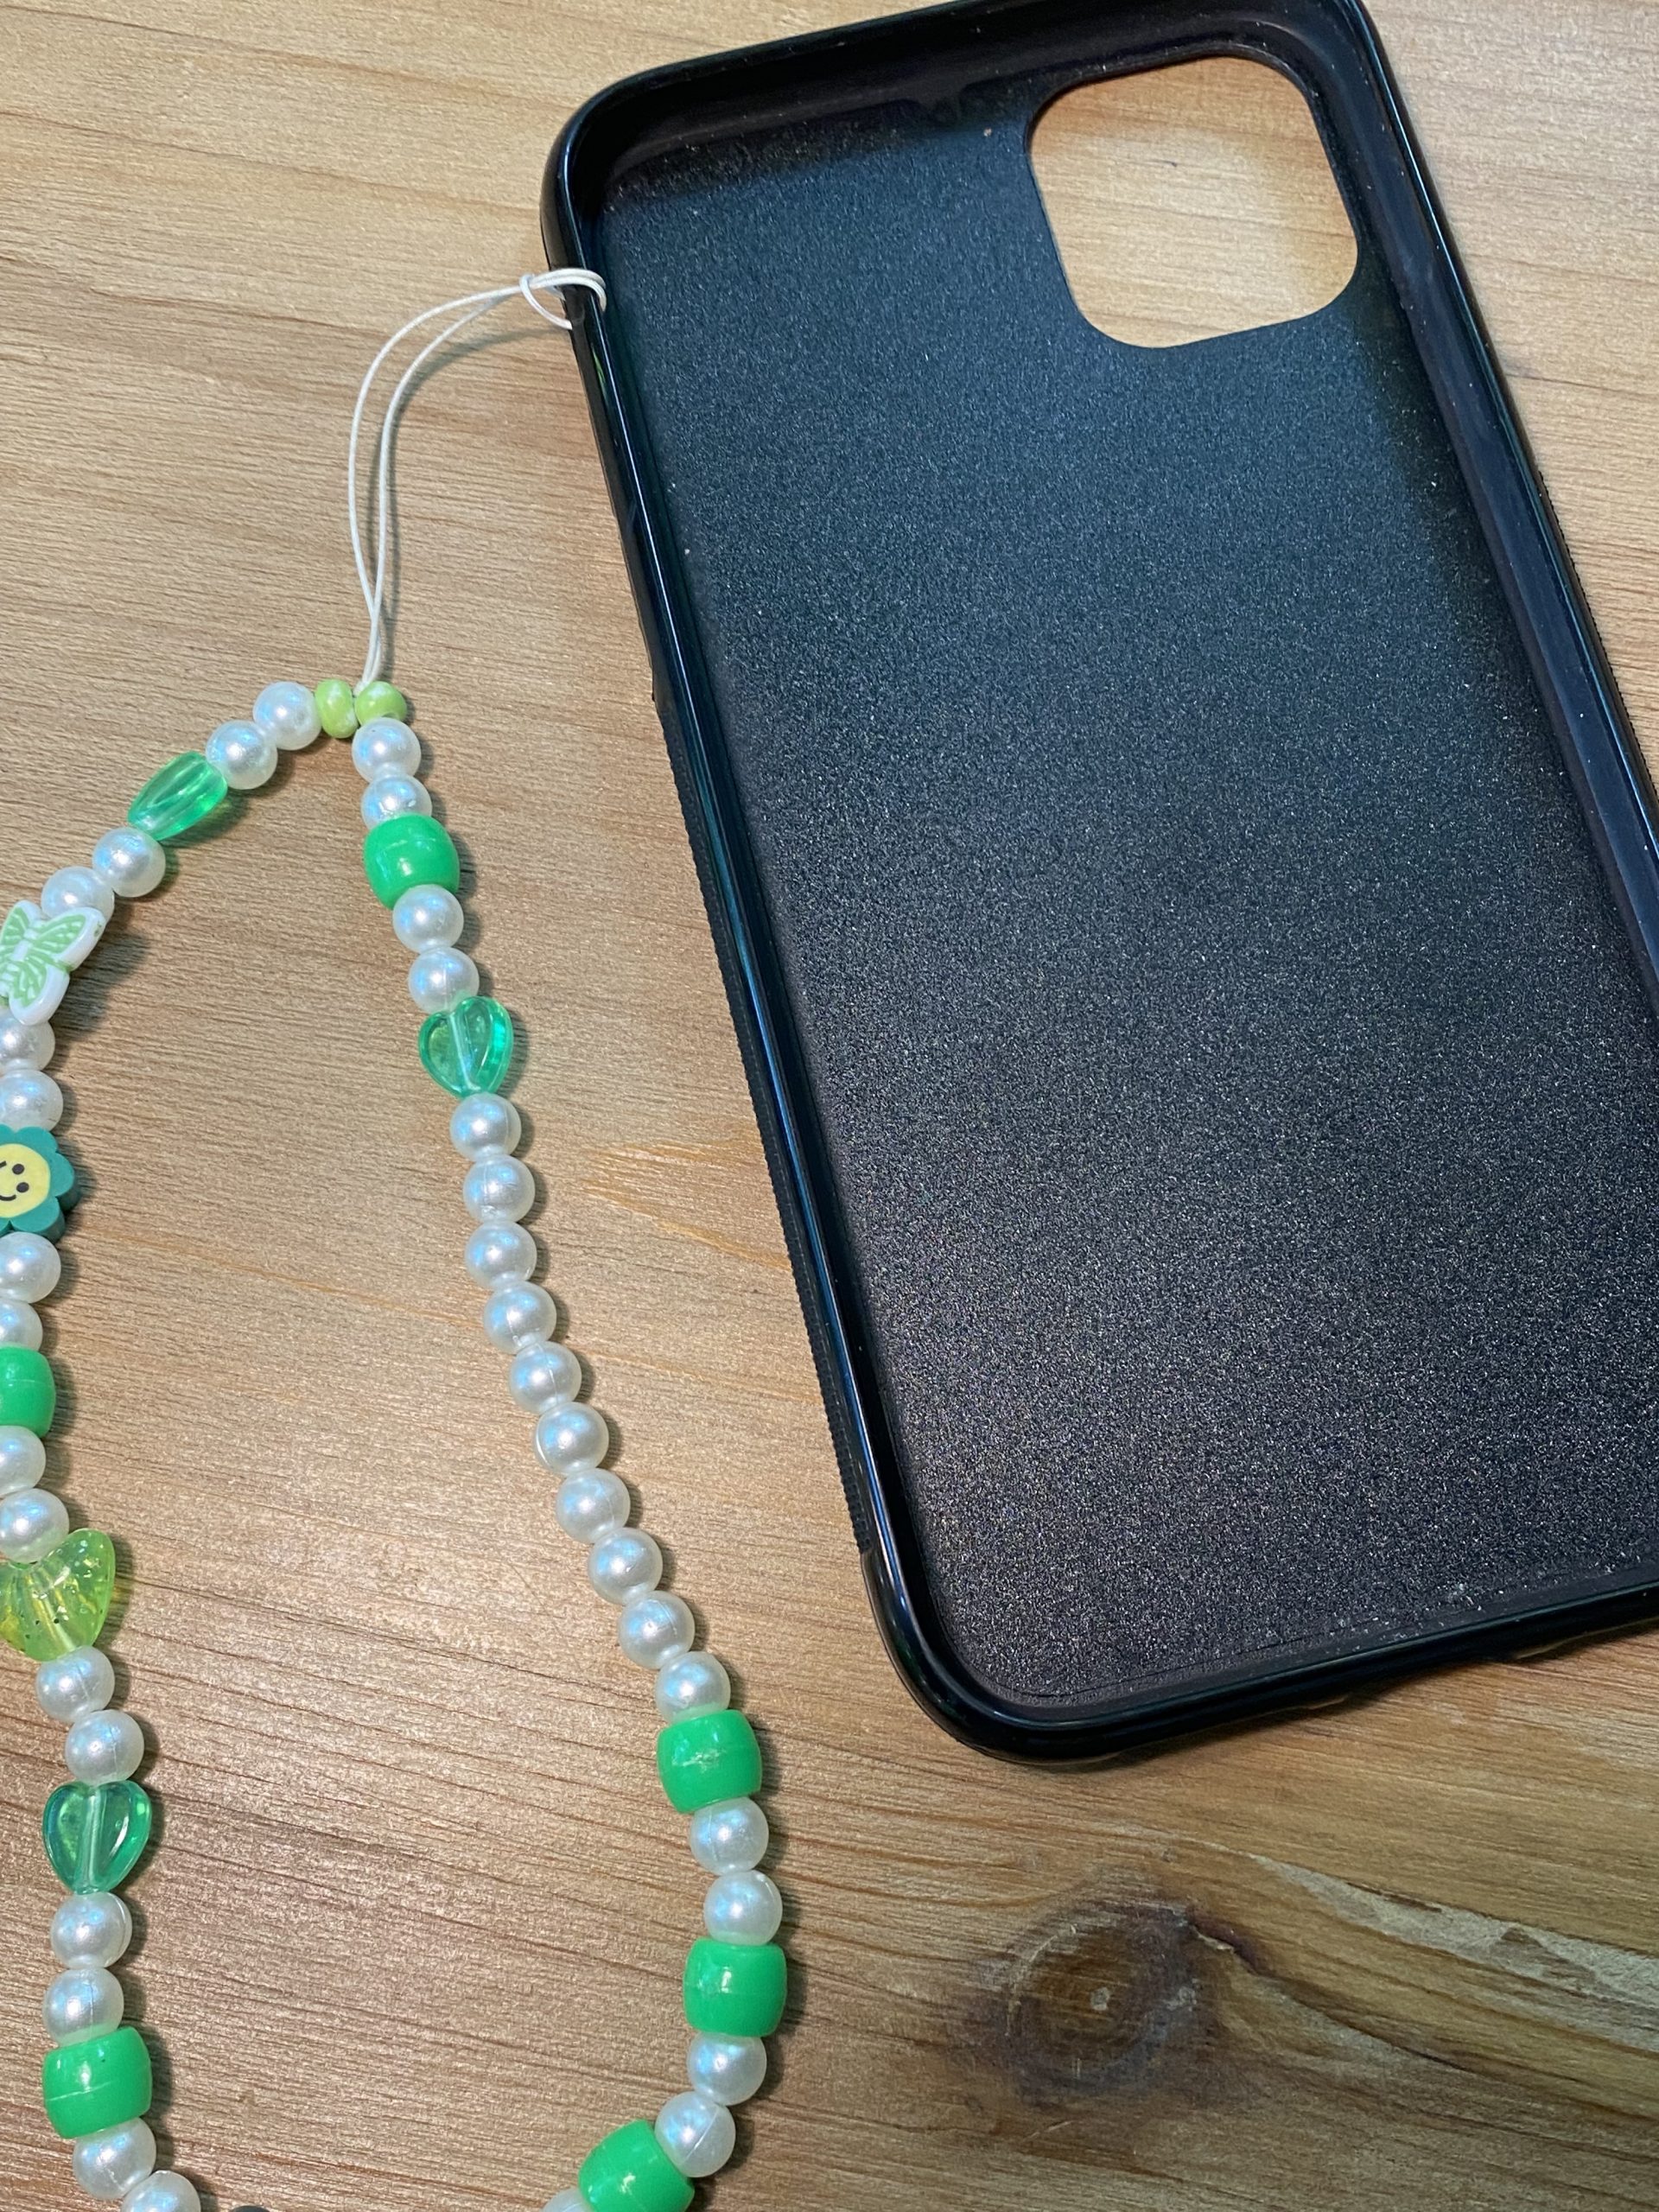 how-to-put-a-phone-charm-on-a-phone-case